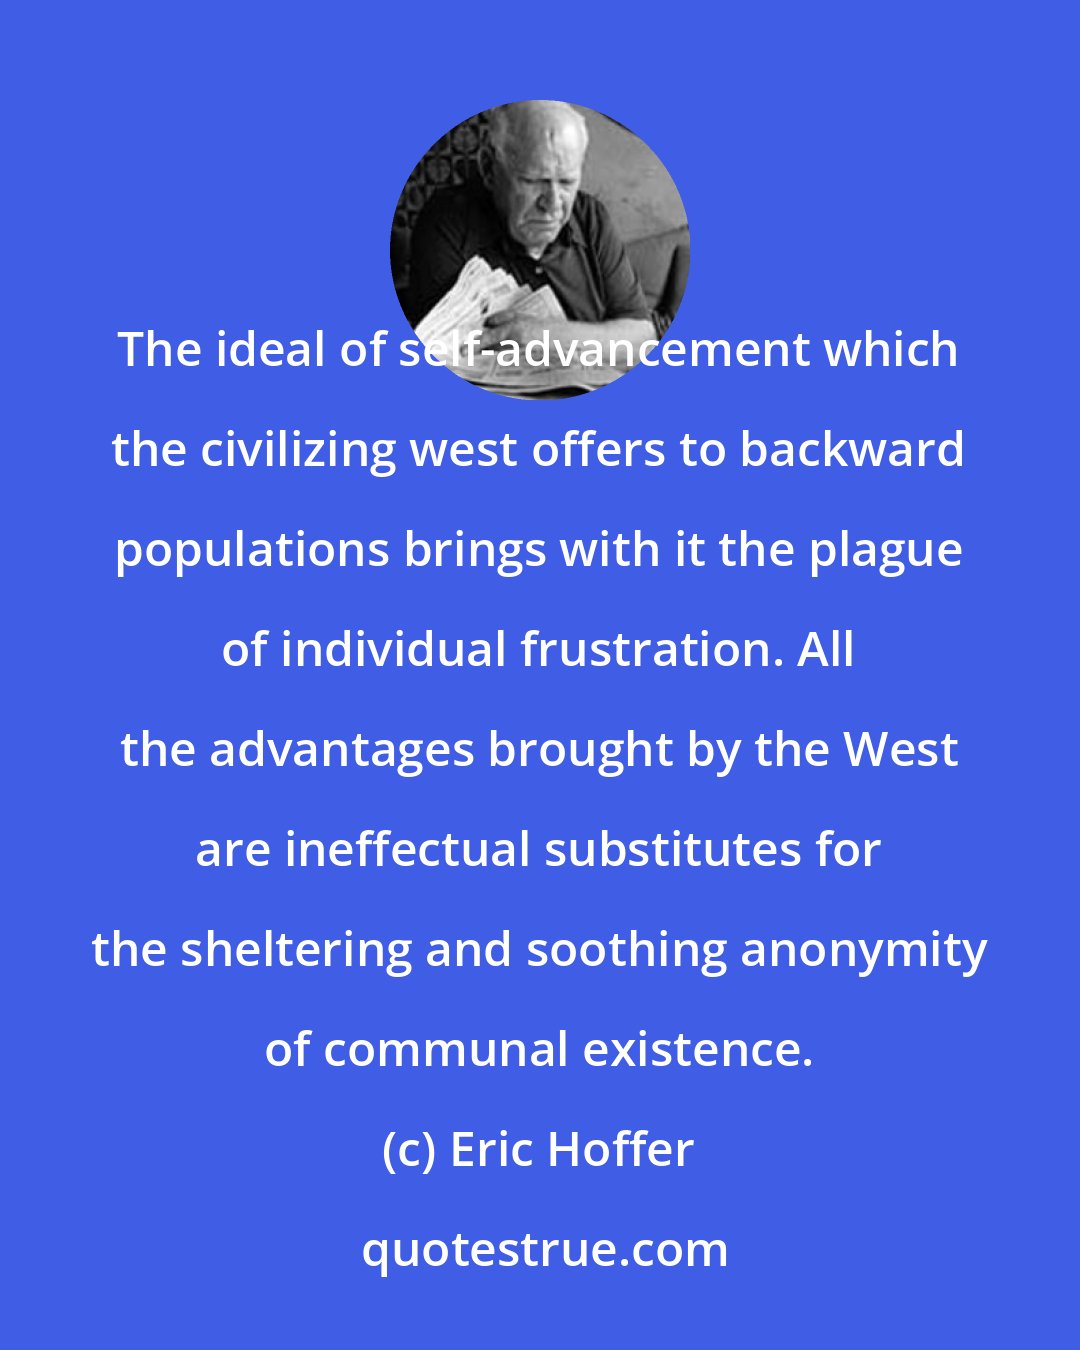 Eric Hoffer: The ideal of self-advancement which the civilizing west offers to backward populations brings with it the plague of individual frustration. All the advantages brought by the West are ineffectual substitutes for the sheltering and soothing anonymity of communal existence.